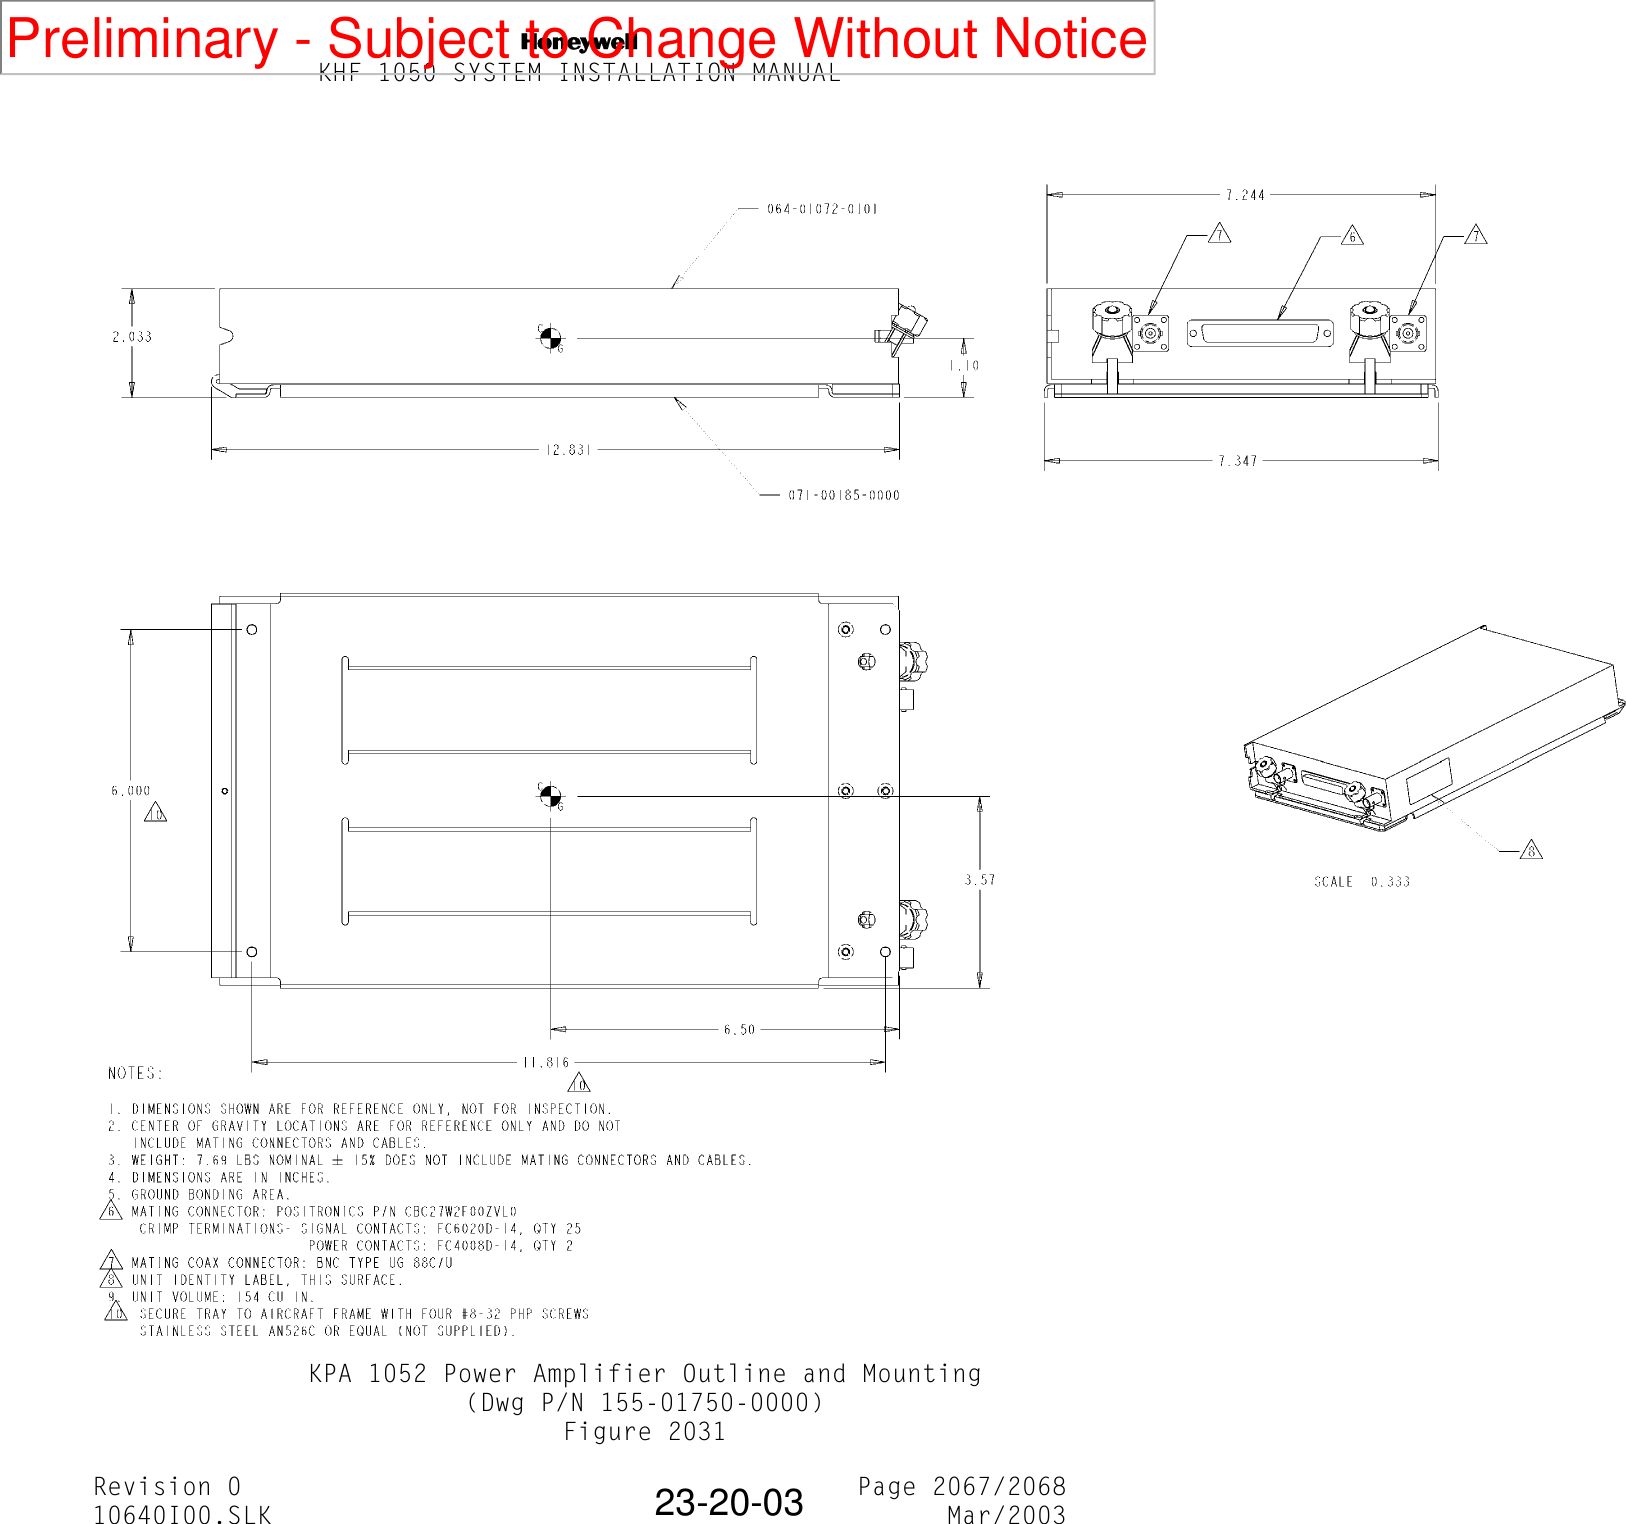 NKHF 1050 SYSTEM INSTALLATION MANUALRevision 0 Page 2067/206810640I00.SLK Mar/200323-20-03KPA 1052 Power Amplifier Outline and Mounting(Dwg P/N 155-01750-0000)Figure 2031Preliminary - Subject to Change Without Notice